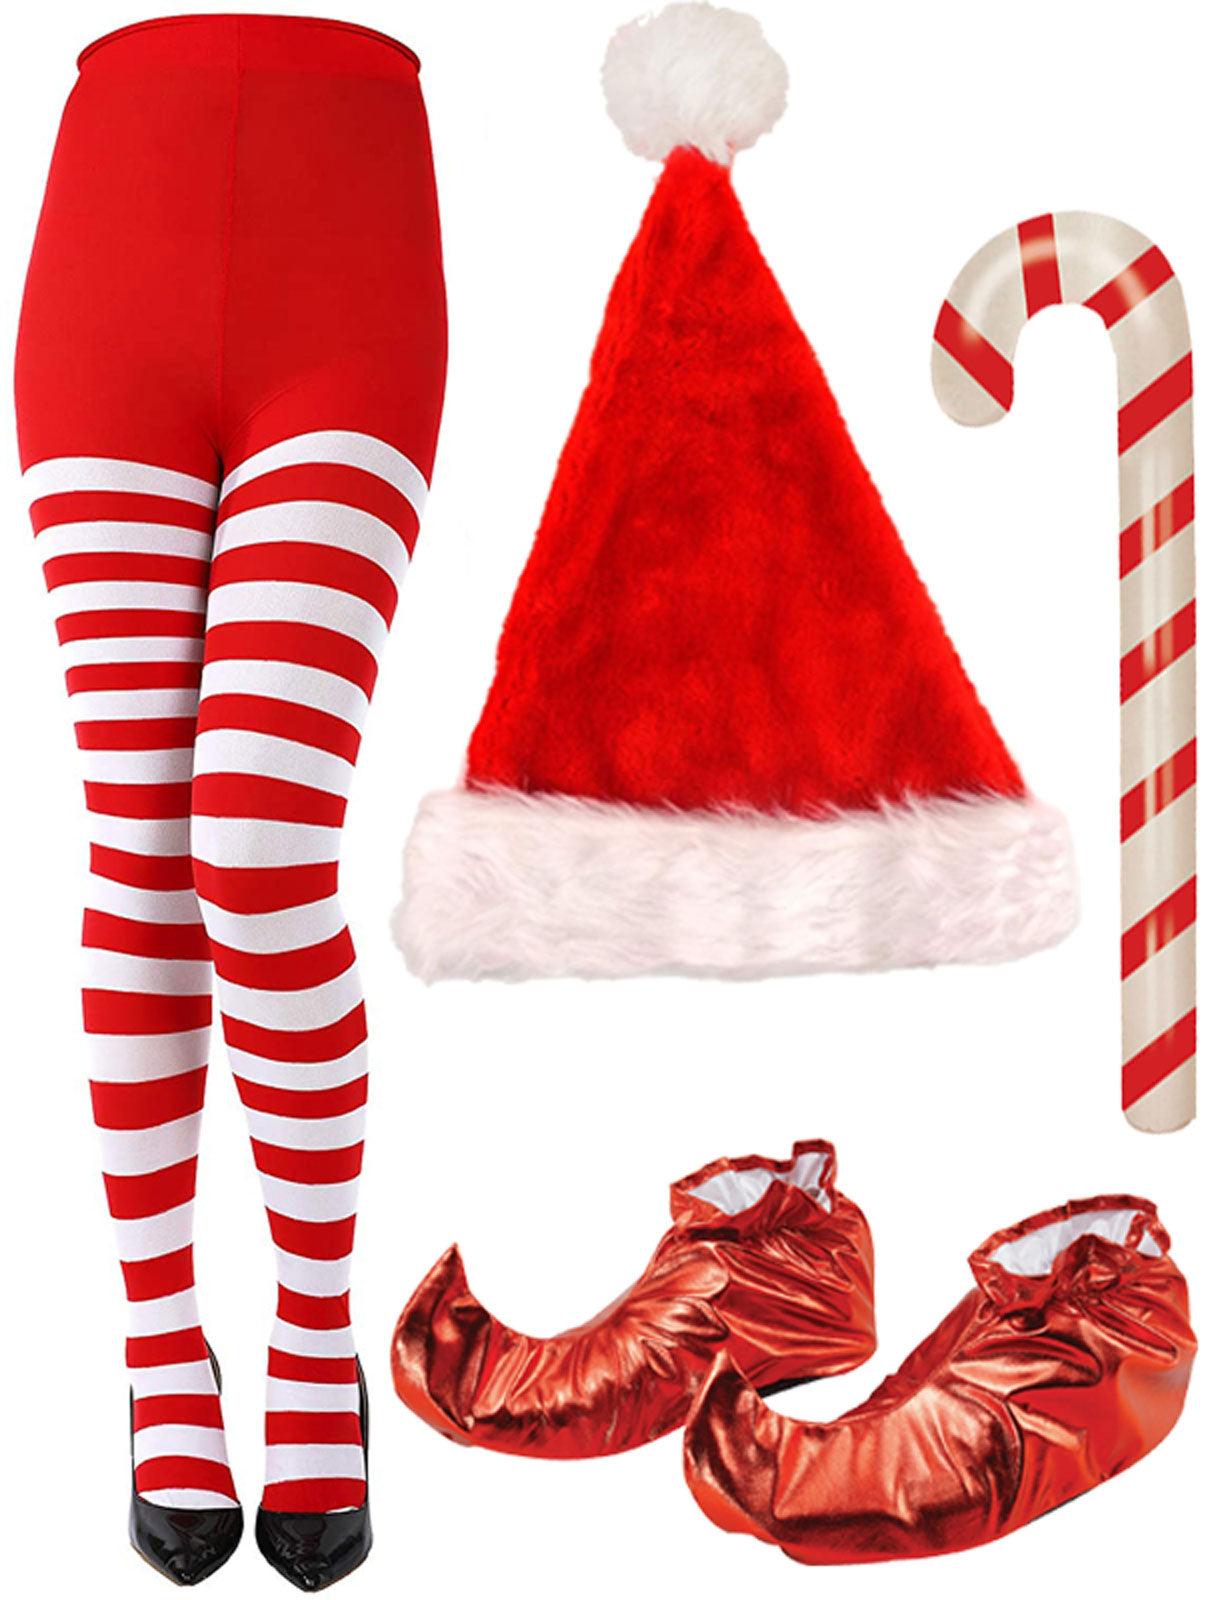 Christmas Striped Tights Candy Cane Shoes Santa Hat Red White Festive Fancy Dress - Labreeze